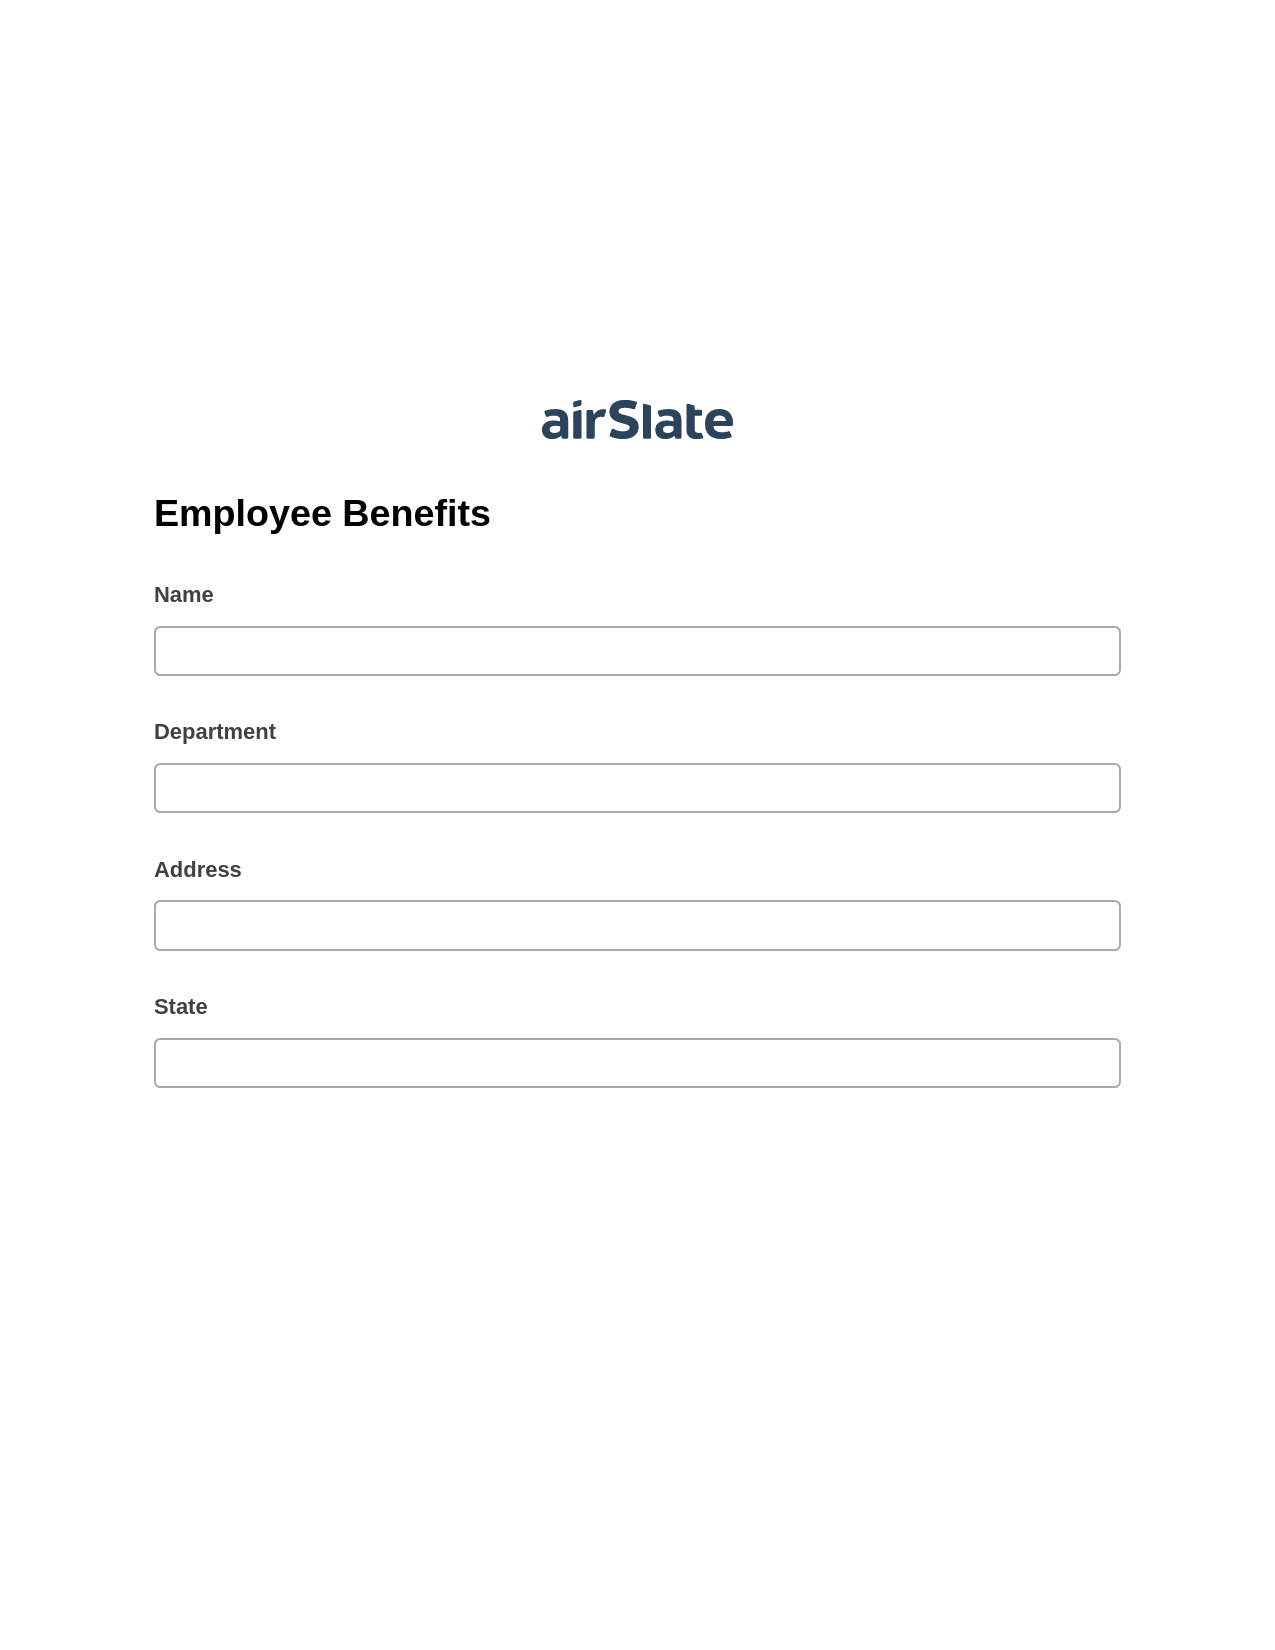 Employee Benefits Pre-fill from AirTable Bot, Create slate addon, Export to Smartsheet